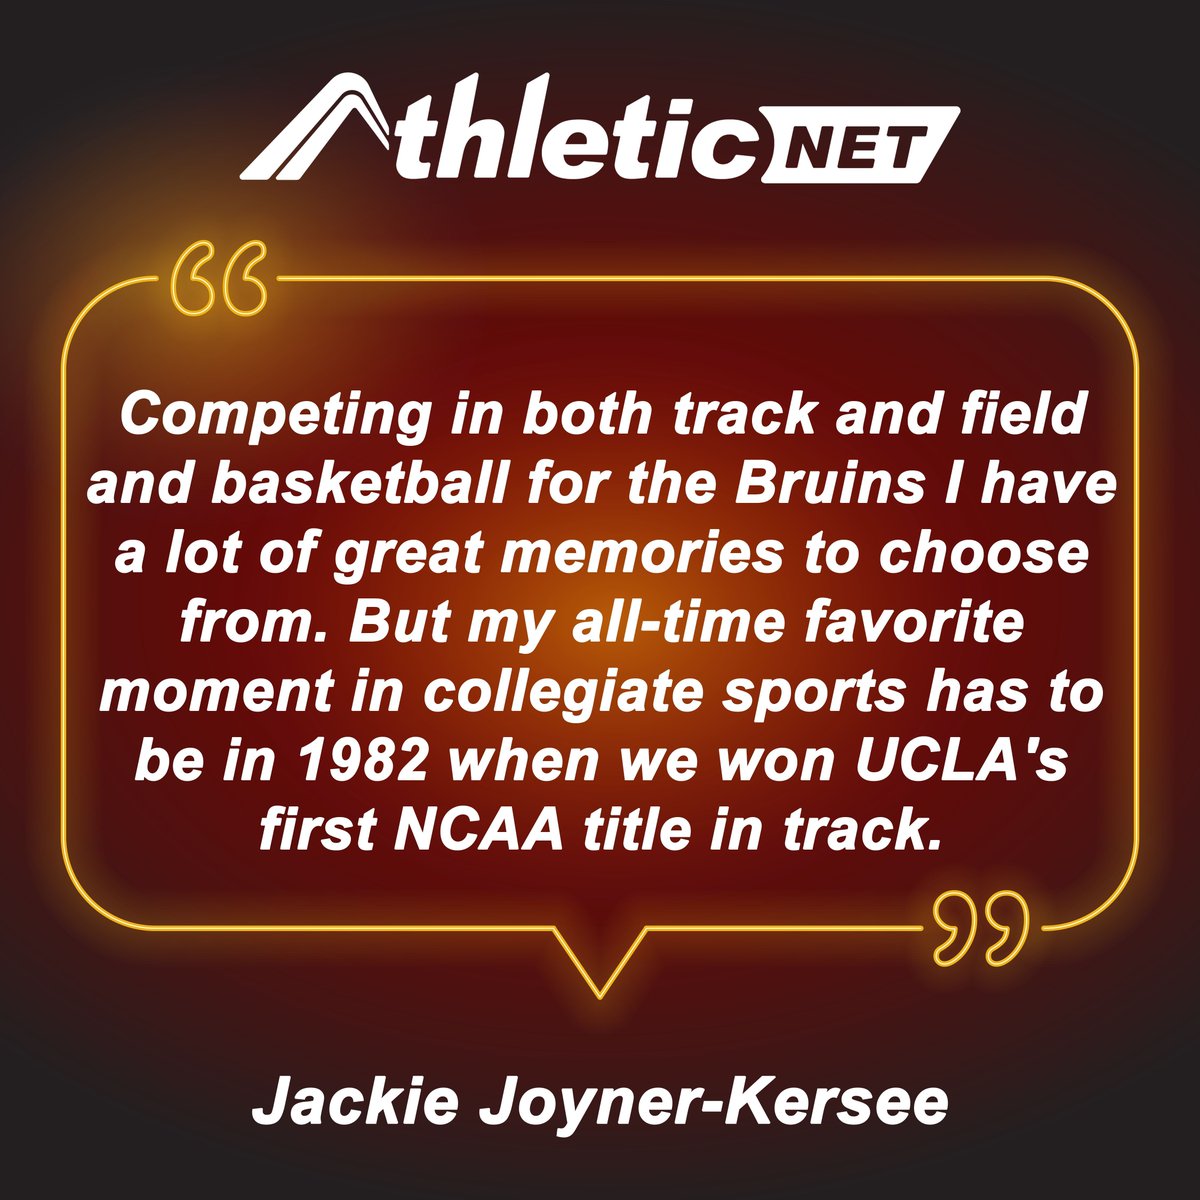 'Competing in both track and field and basketball for the Bruins I have a lot of great memories to choose from. But my all-time favorite moment in collegiate sports has to be in 1982 when we won UCLA's first NCAA title in track.' - Jackie Joyner-Kersee